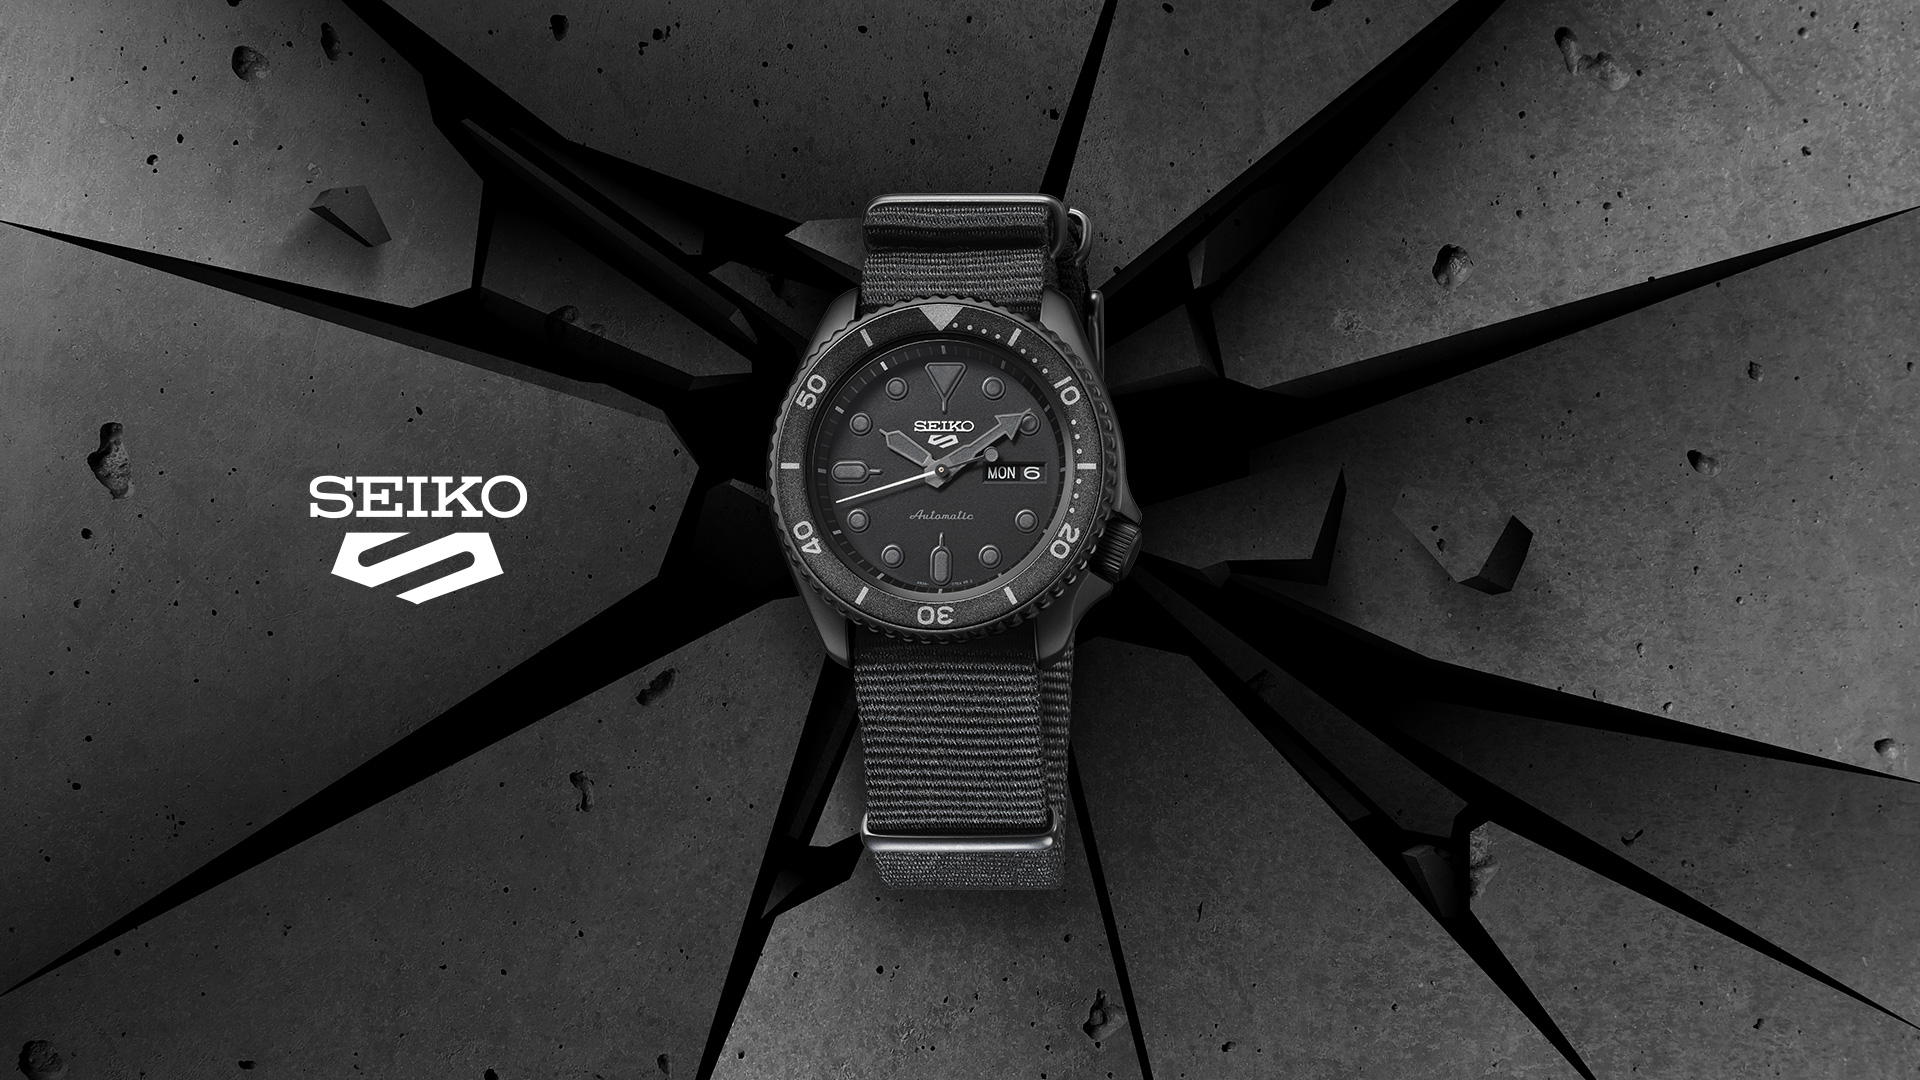 https://www.seikowatches.com/pt-pt/-/media/Images/GlobalEn/Seiko/Home/products/5sports/brand-pc_top_5sports.jpg